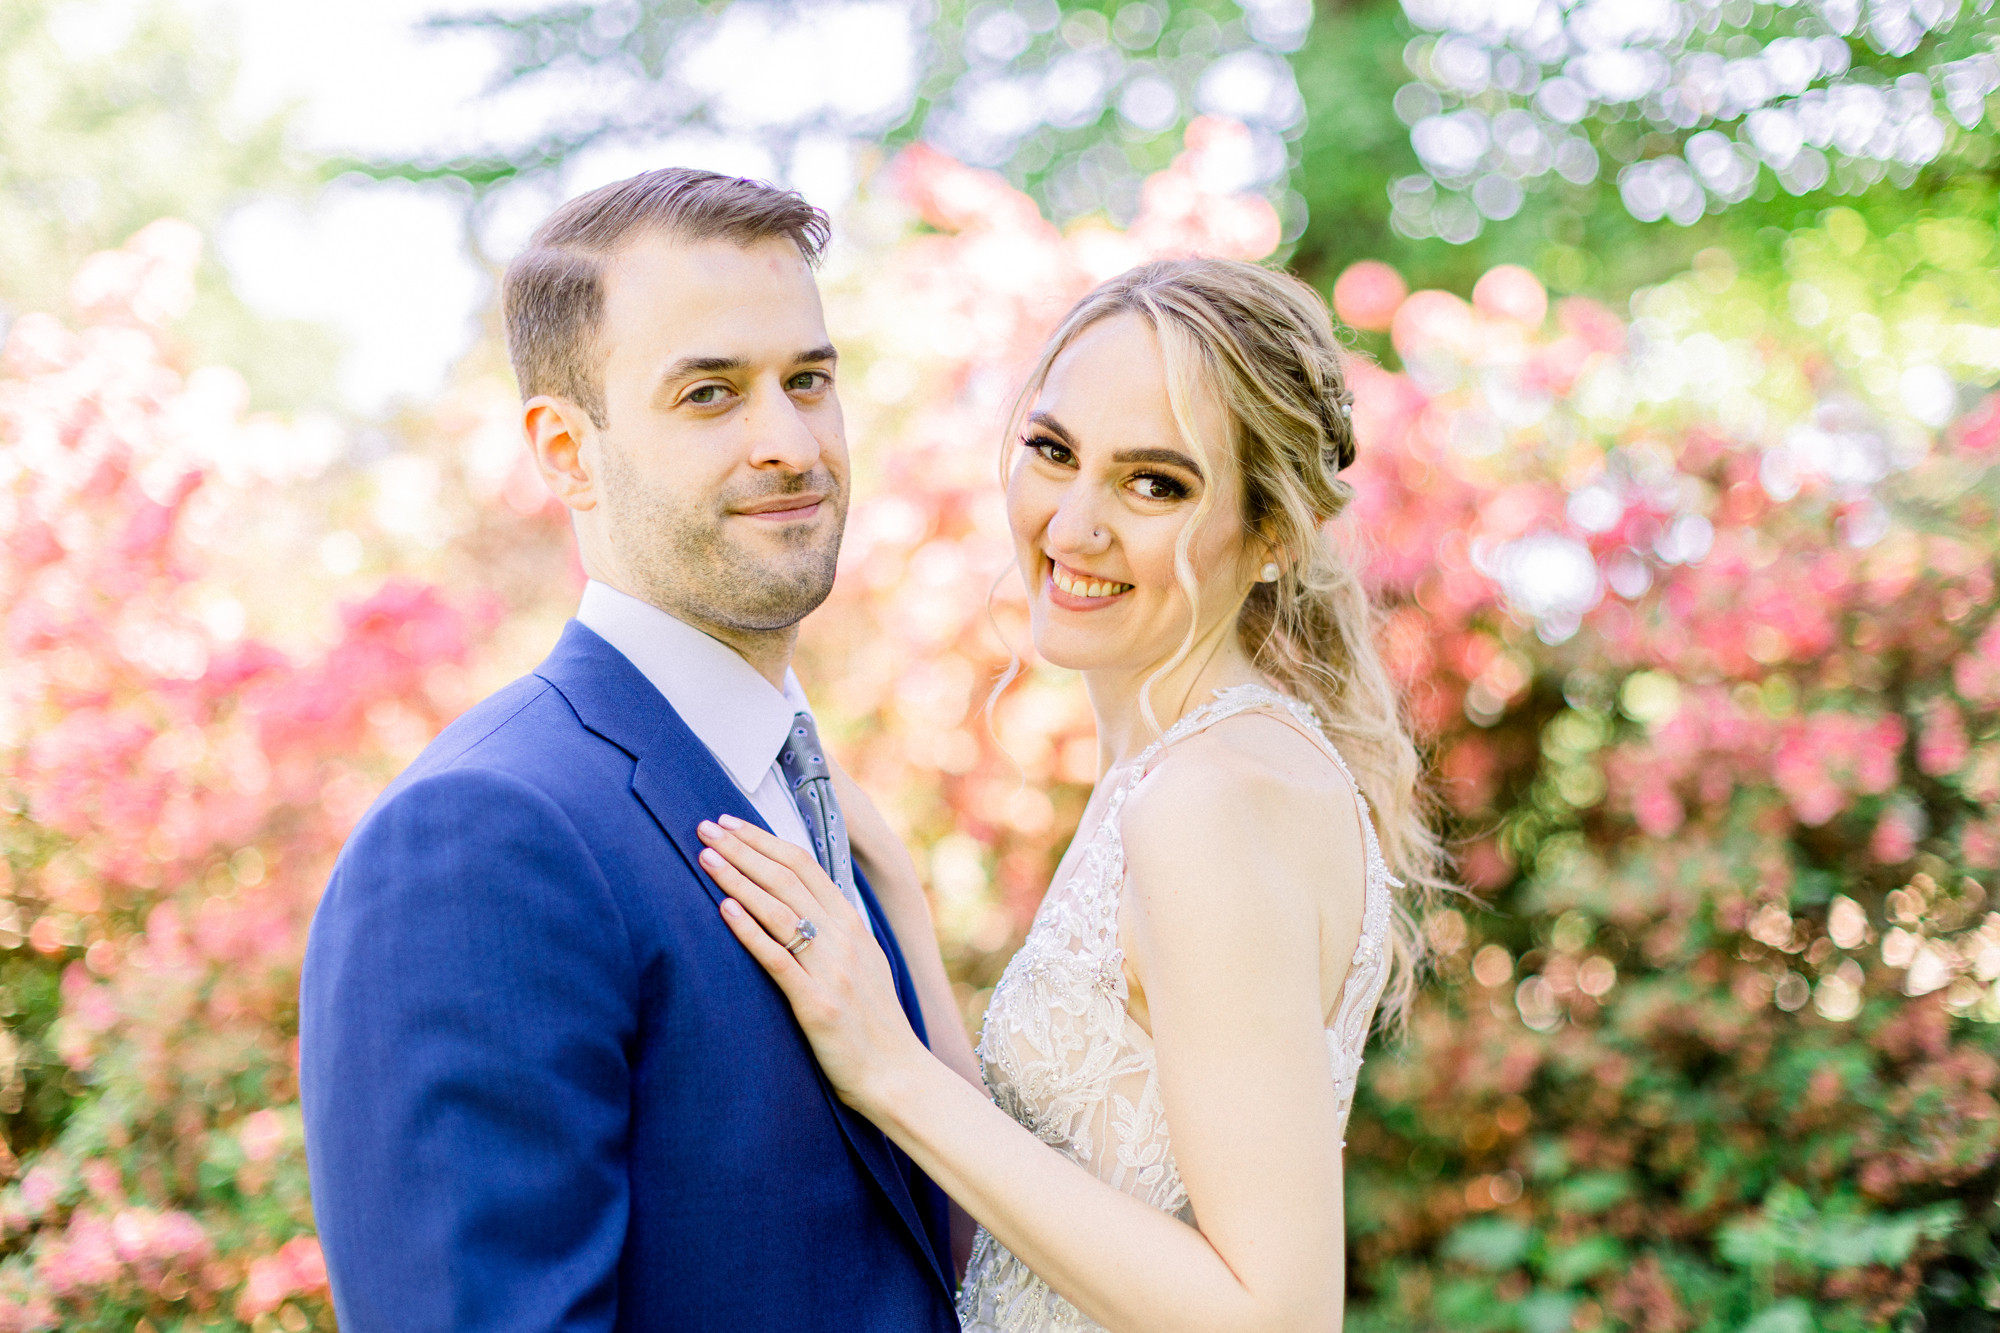 Jaw-dropping Elopement Photos in Central Park's Spring Wisteria Pergola